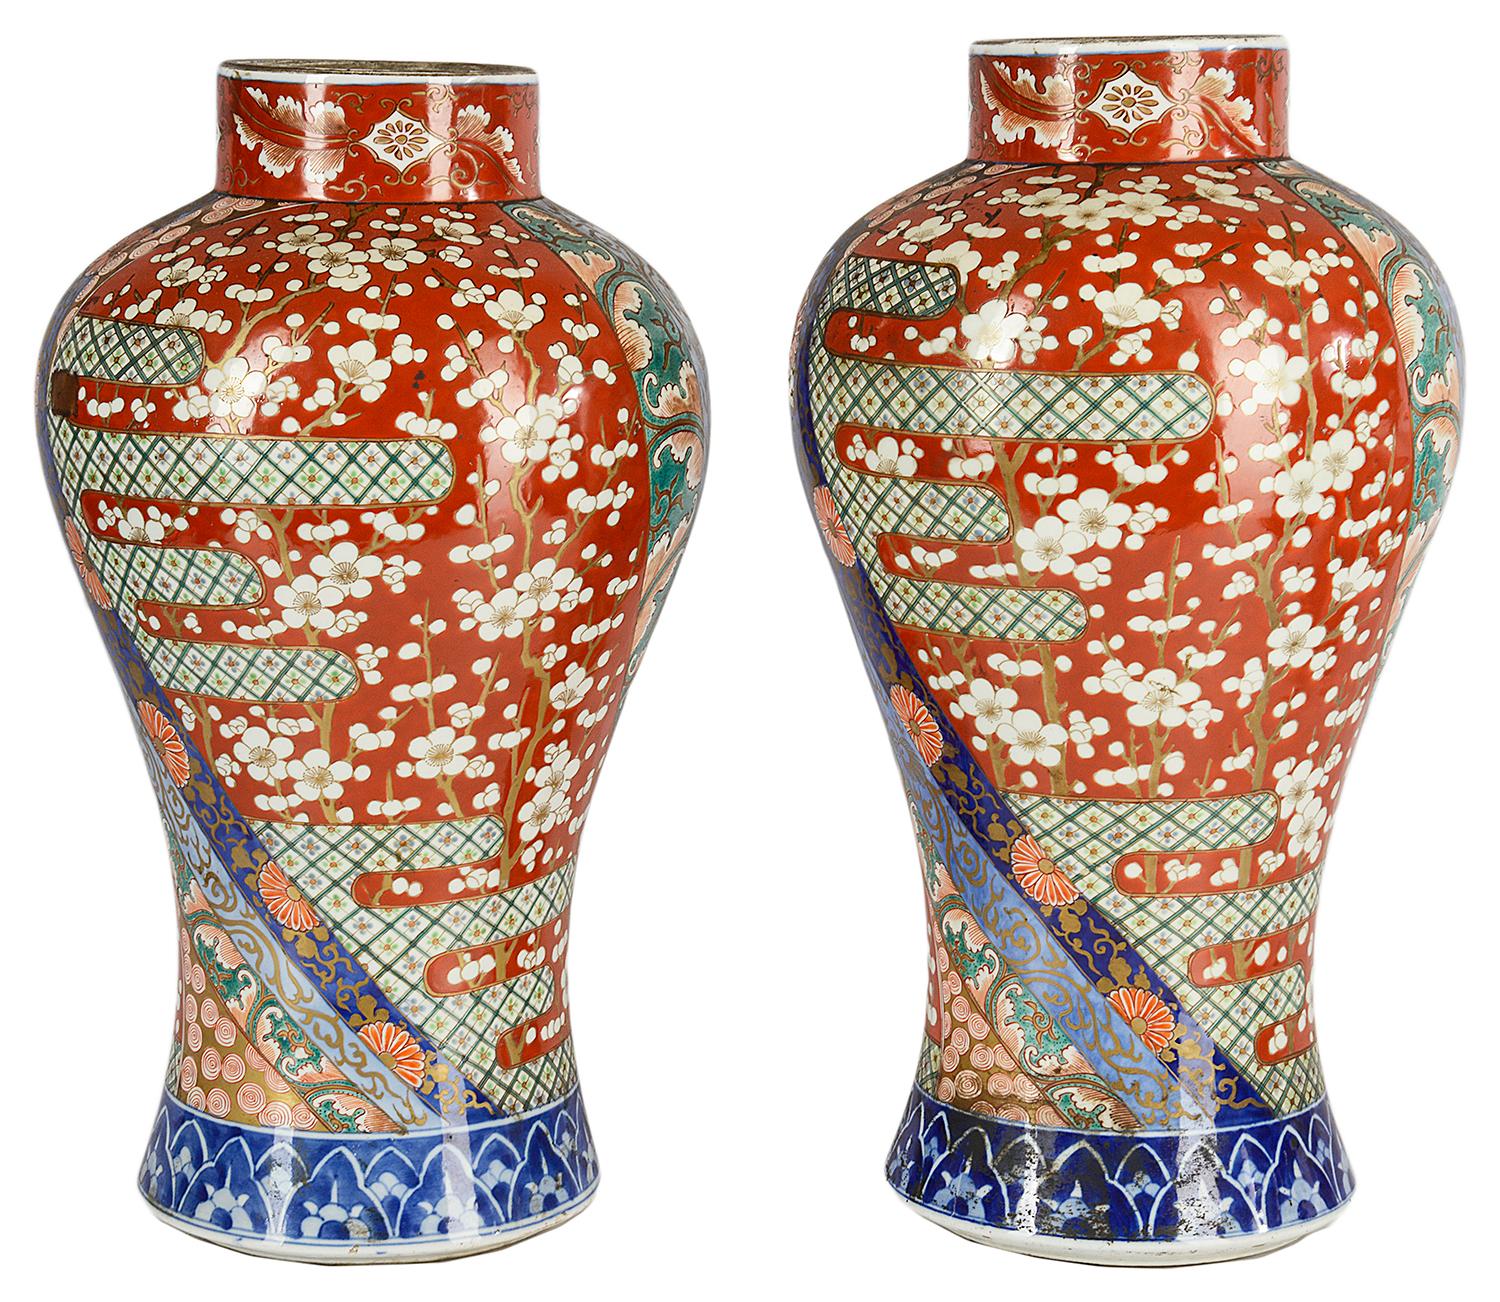 A very good quality and sticking pair of late 19th century Japanese Imari vases (Meiji period). Each having swirling panels around with classical flowers, motifs and decoration. Prunus blossom trees in the large panels and blue and white borders to